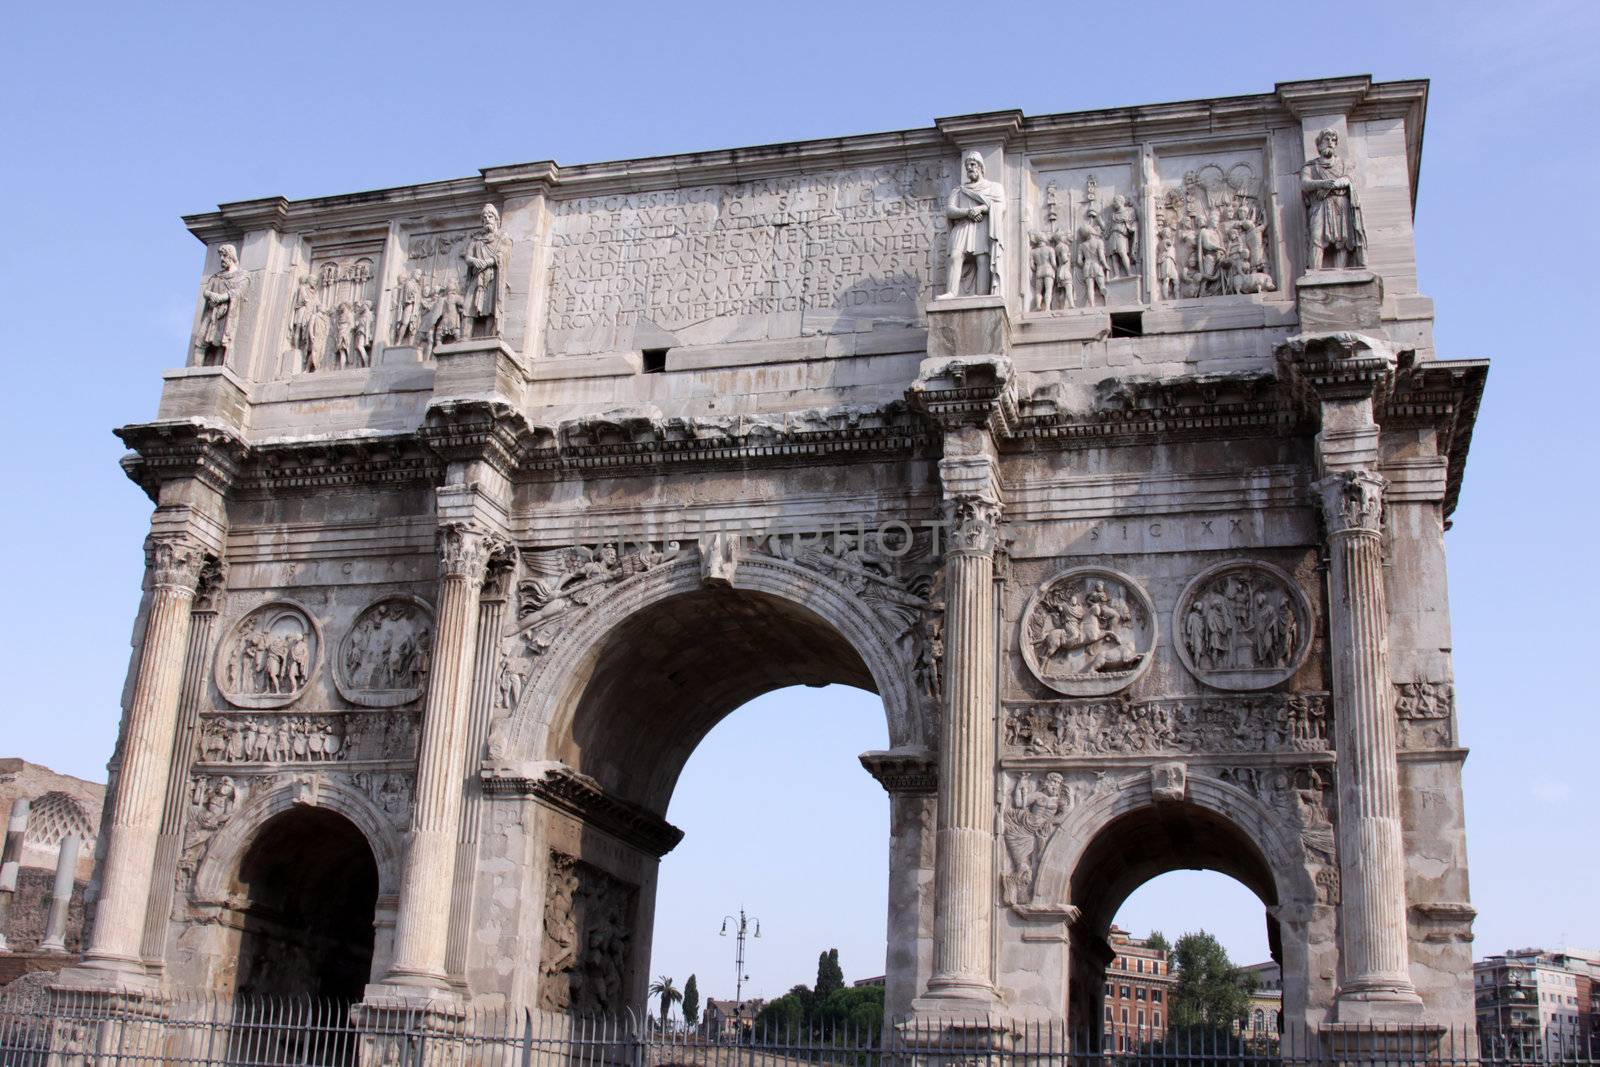 The Arch of Constantine of in Rome, Italy.
